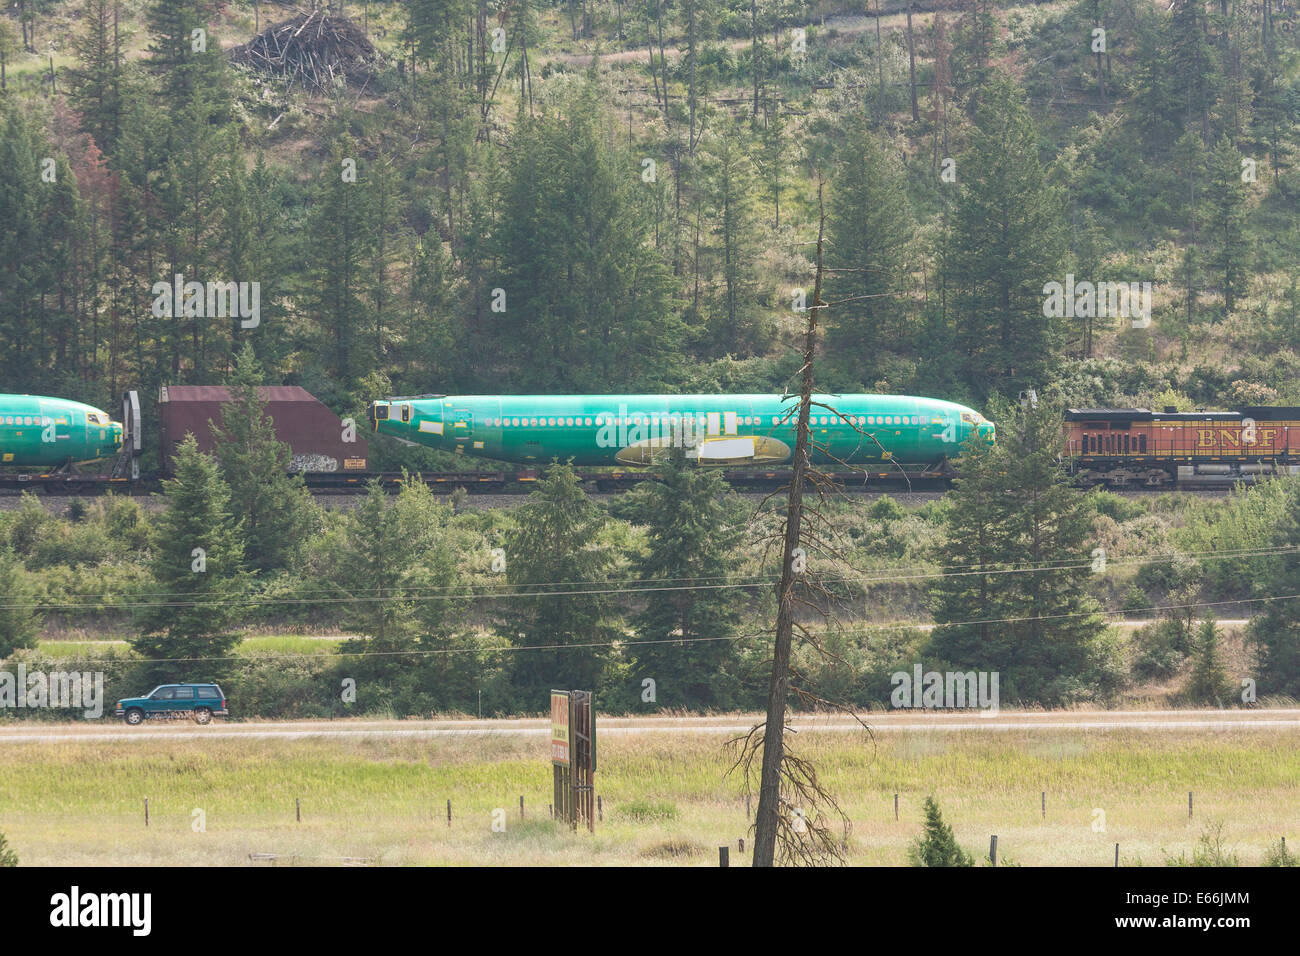 Green Plastic Wrapped Airplane Fuselages being Transported on Flatbed Railroad Car, MT,  USA Stock Photo